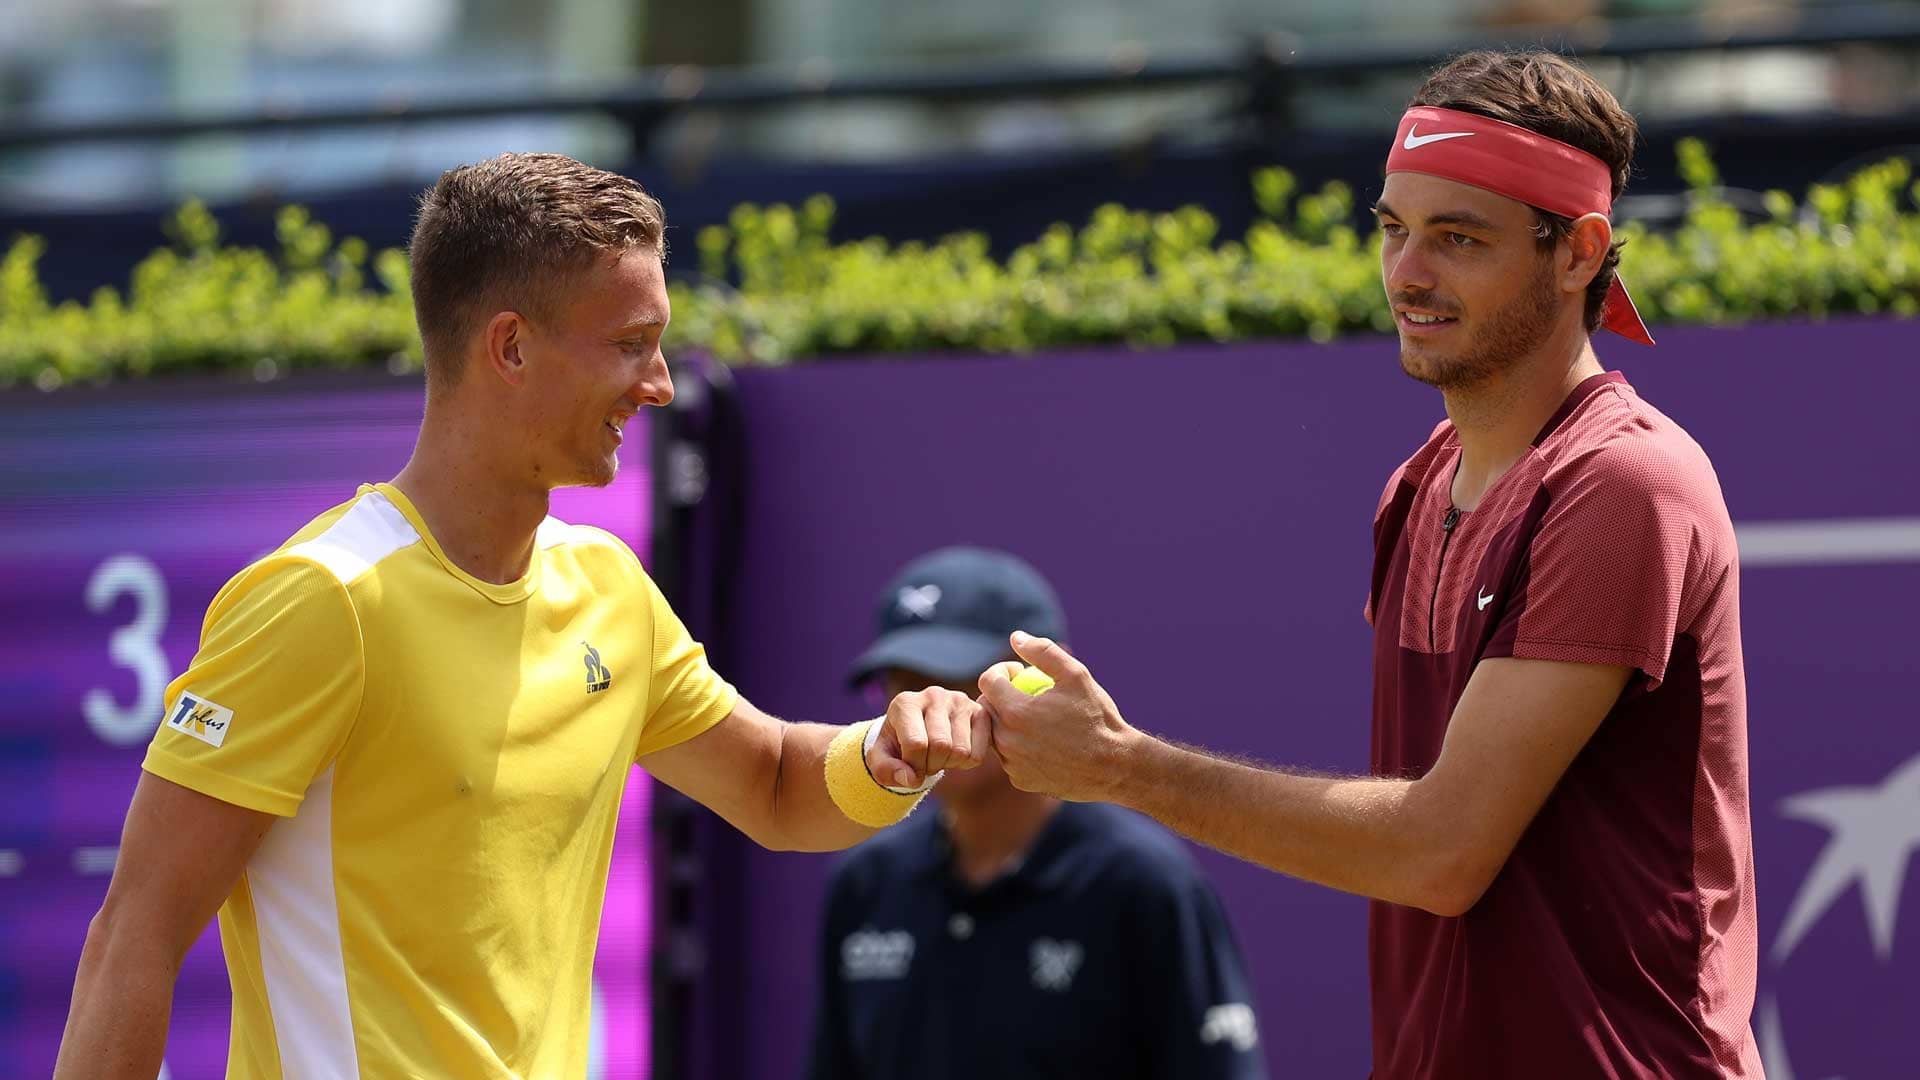 Jiri Lehecka and Taylor Fritz are both seeking their first ATP Tour doubles title.